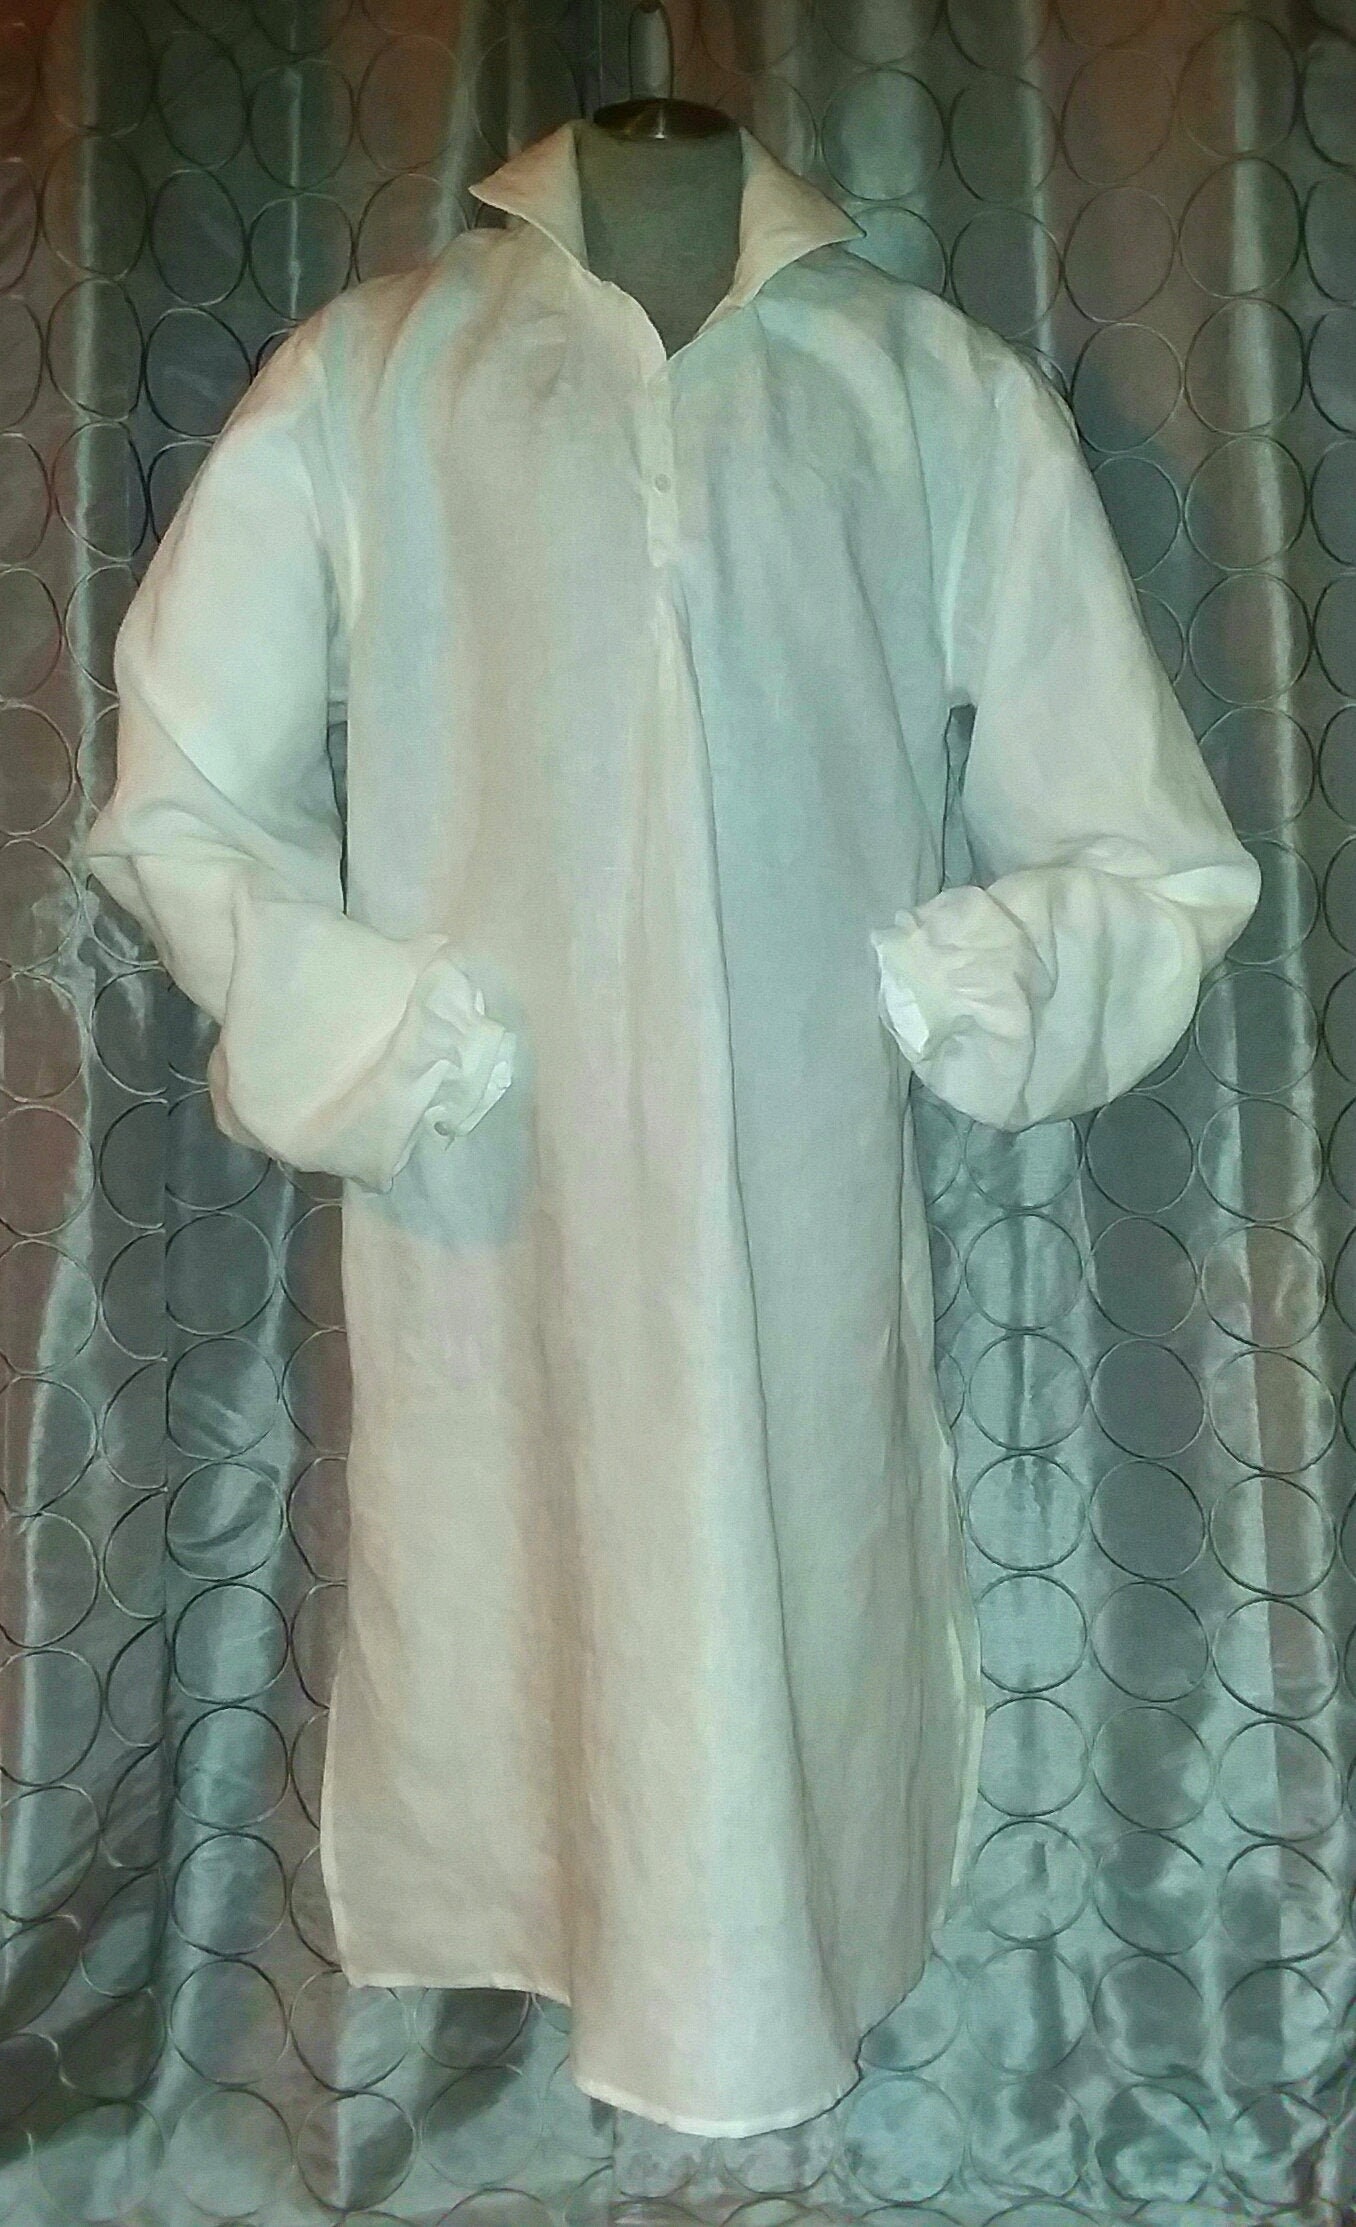 Victorian Edwardian Nightshirt in 100% Linen for Both Men and - Etsy